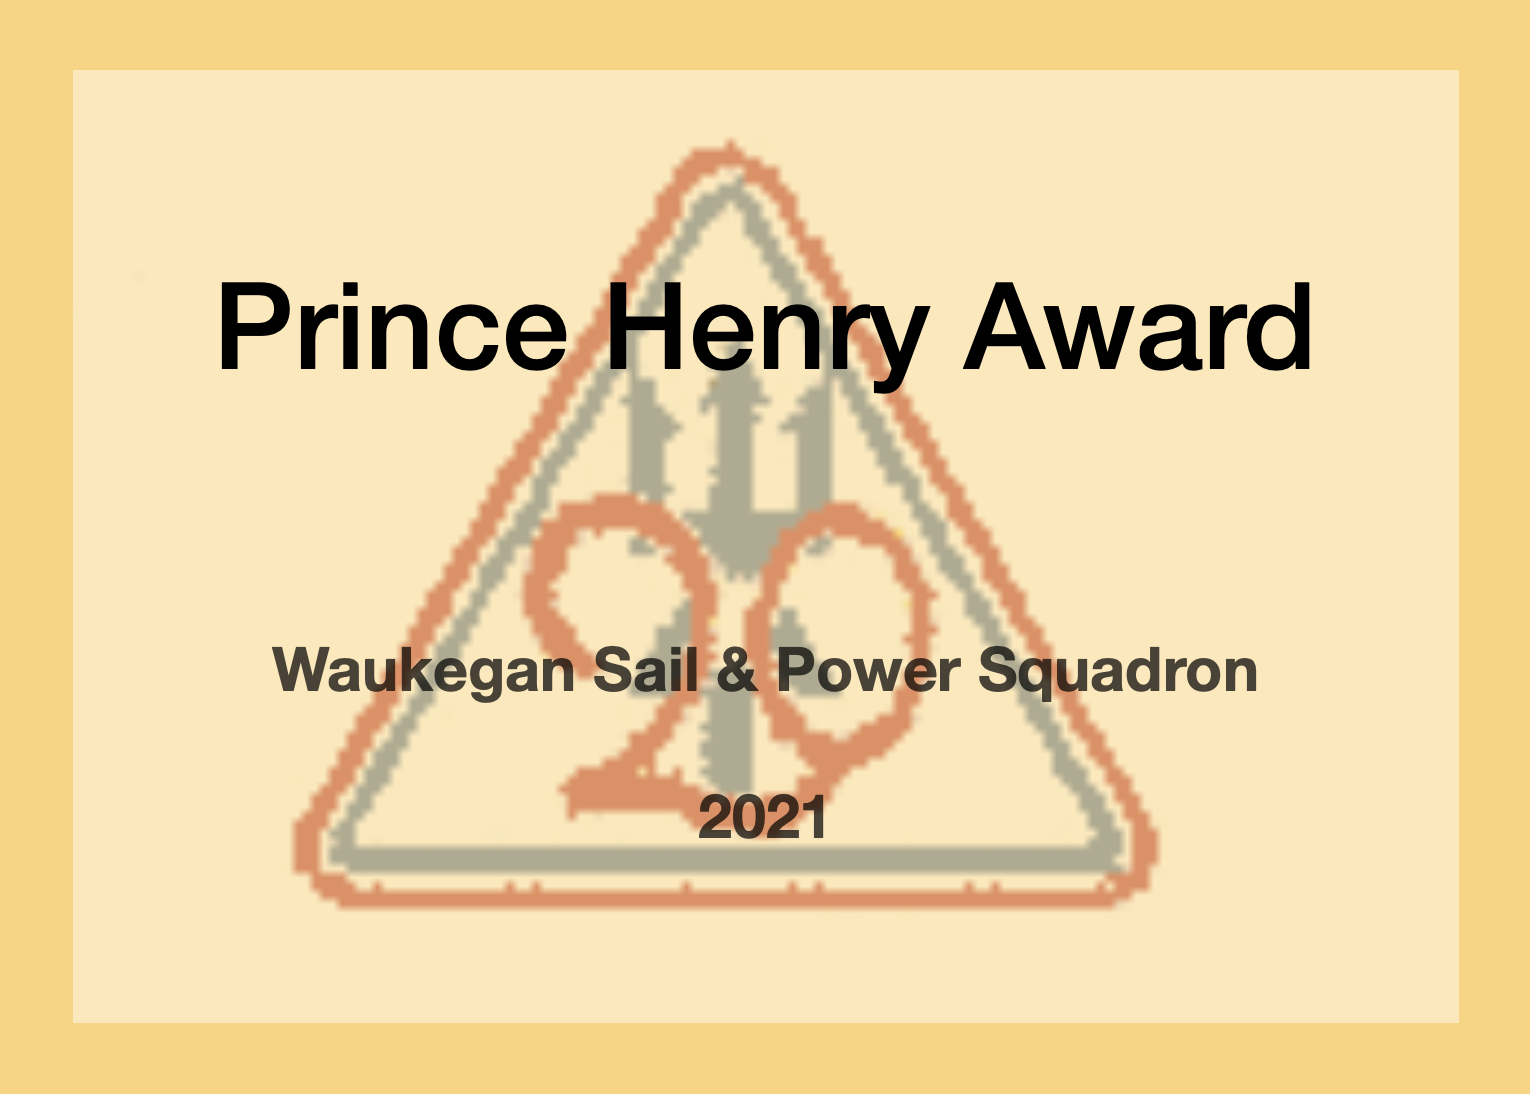 Pictured is the Prince Henry Award for graduating the most students in advanced navigation classes.